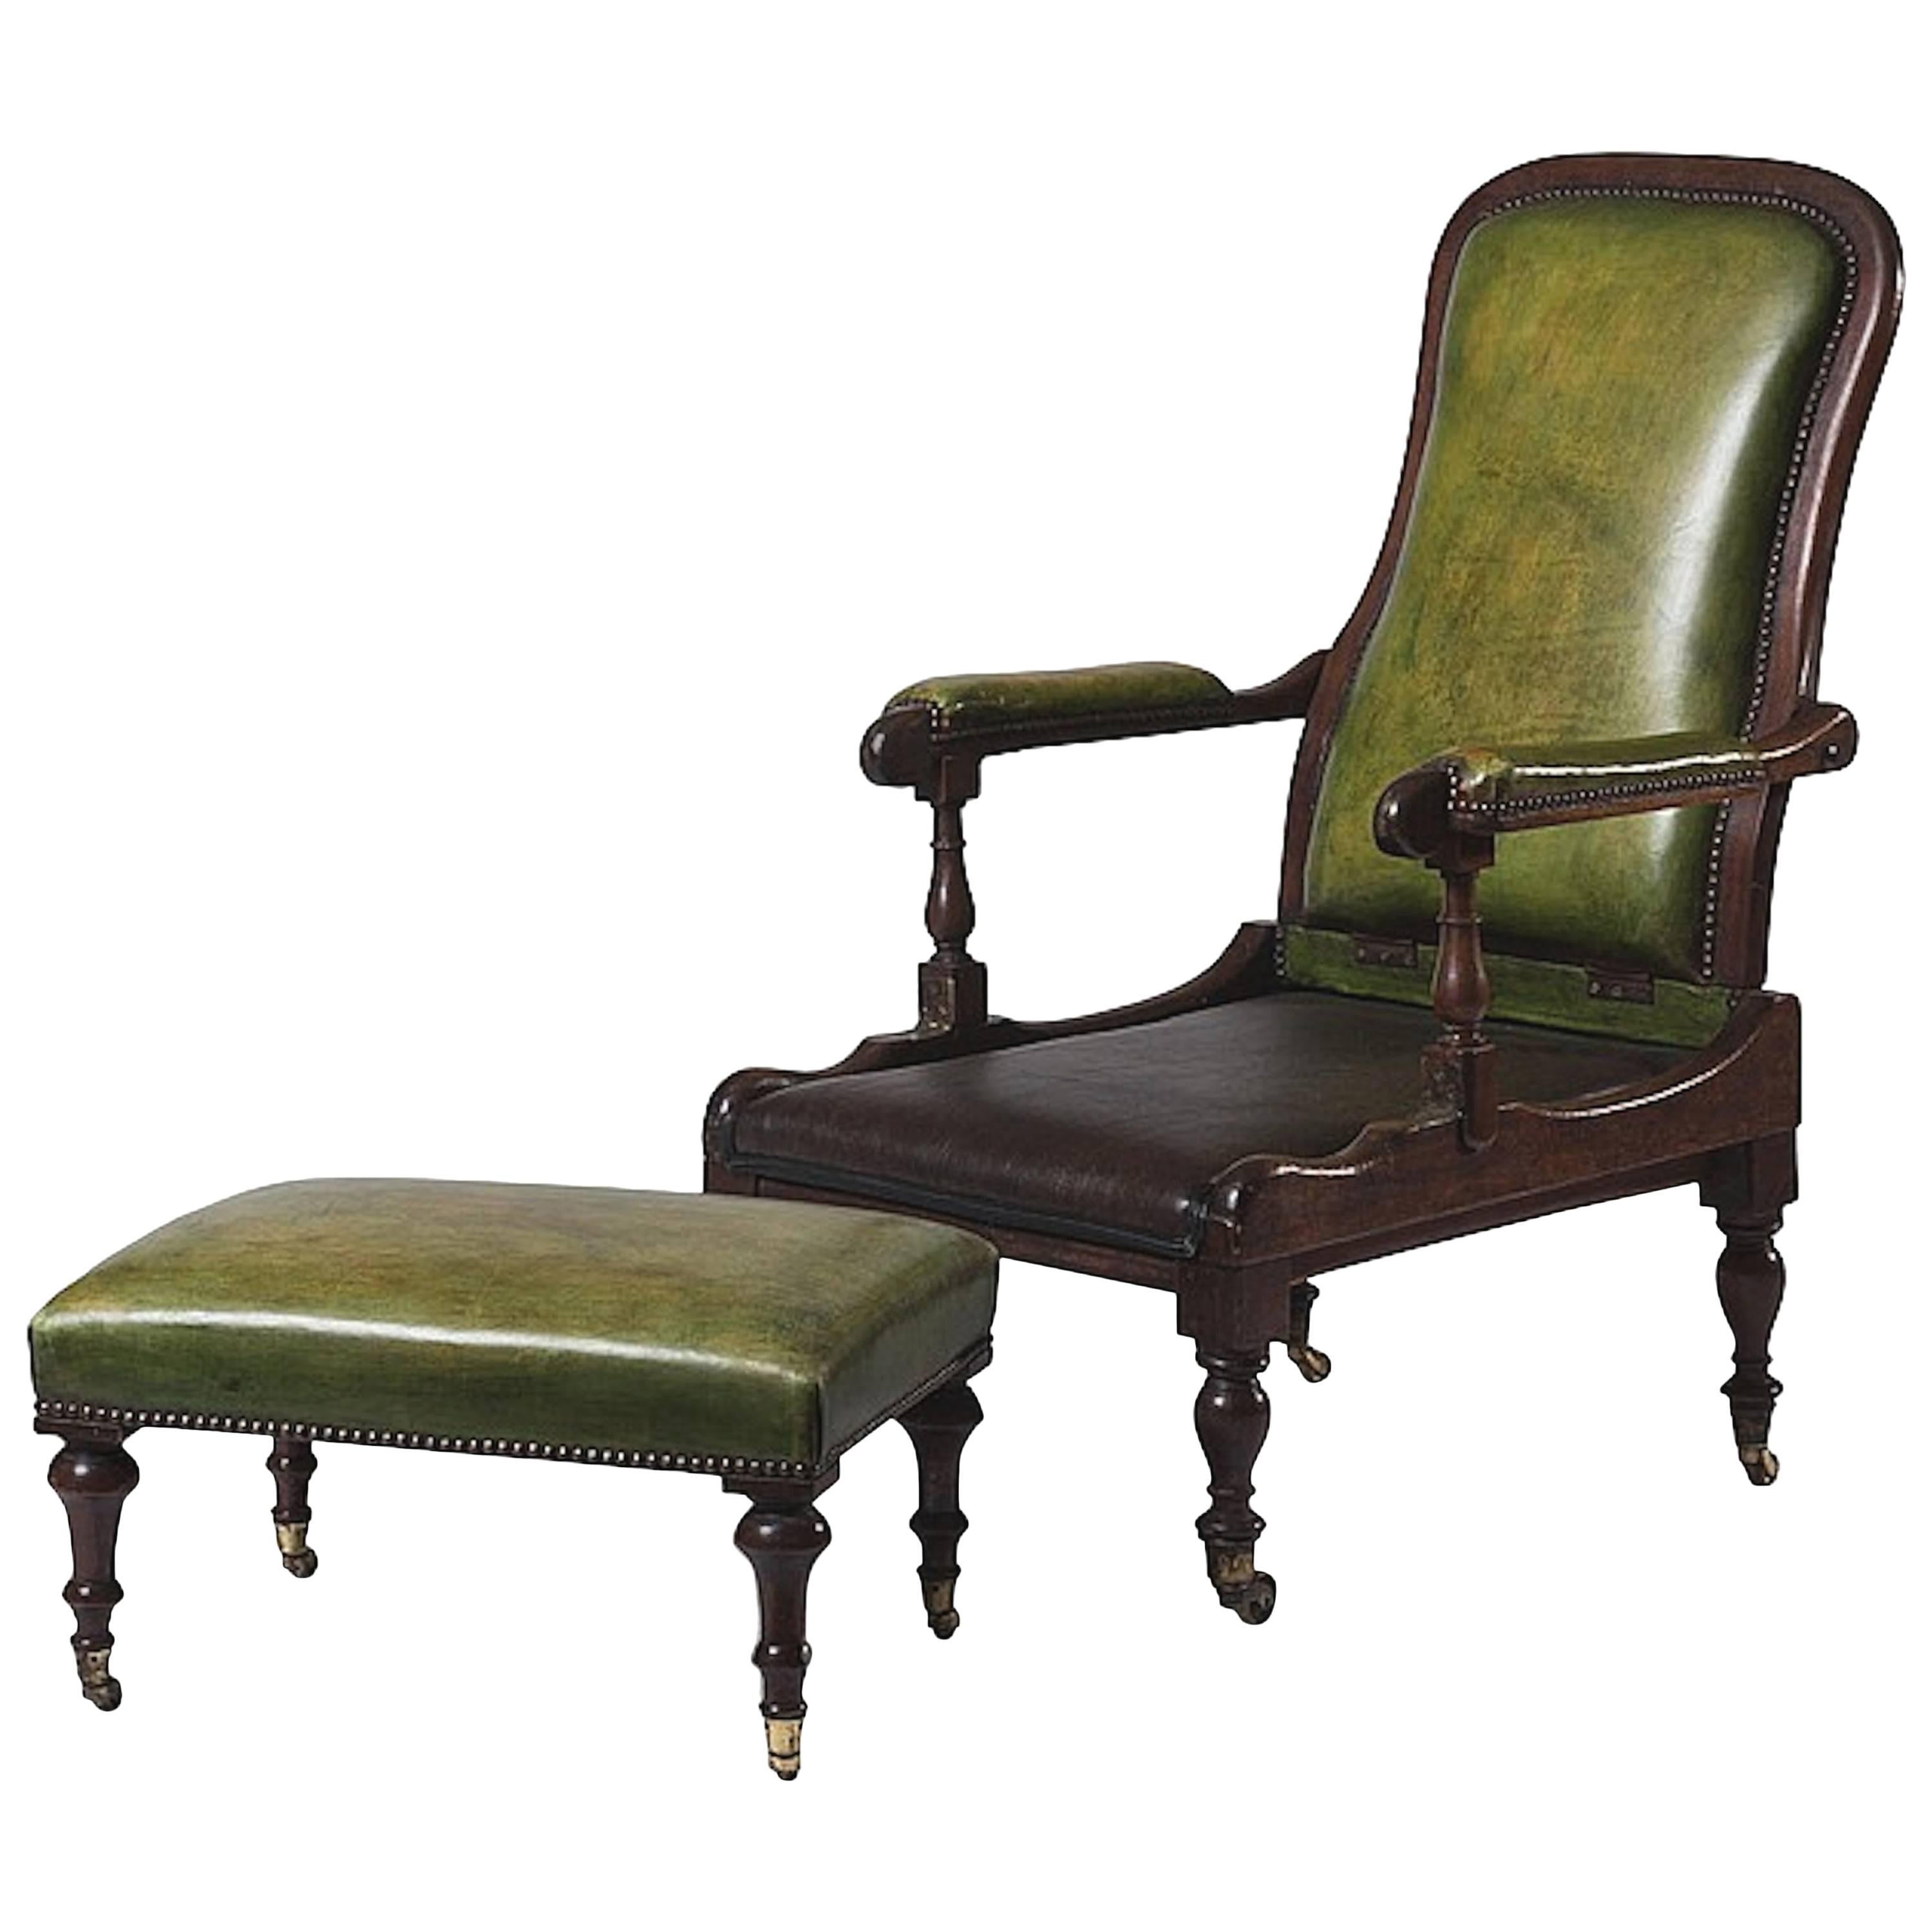 British Folding Campaign Chair and Ottoman Mahogany and Leather, circa 1860